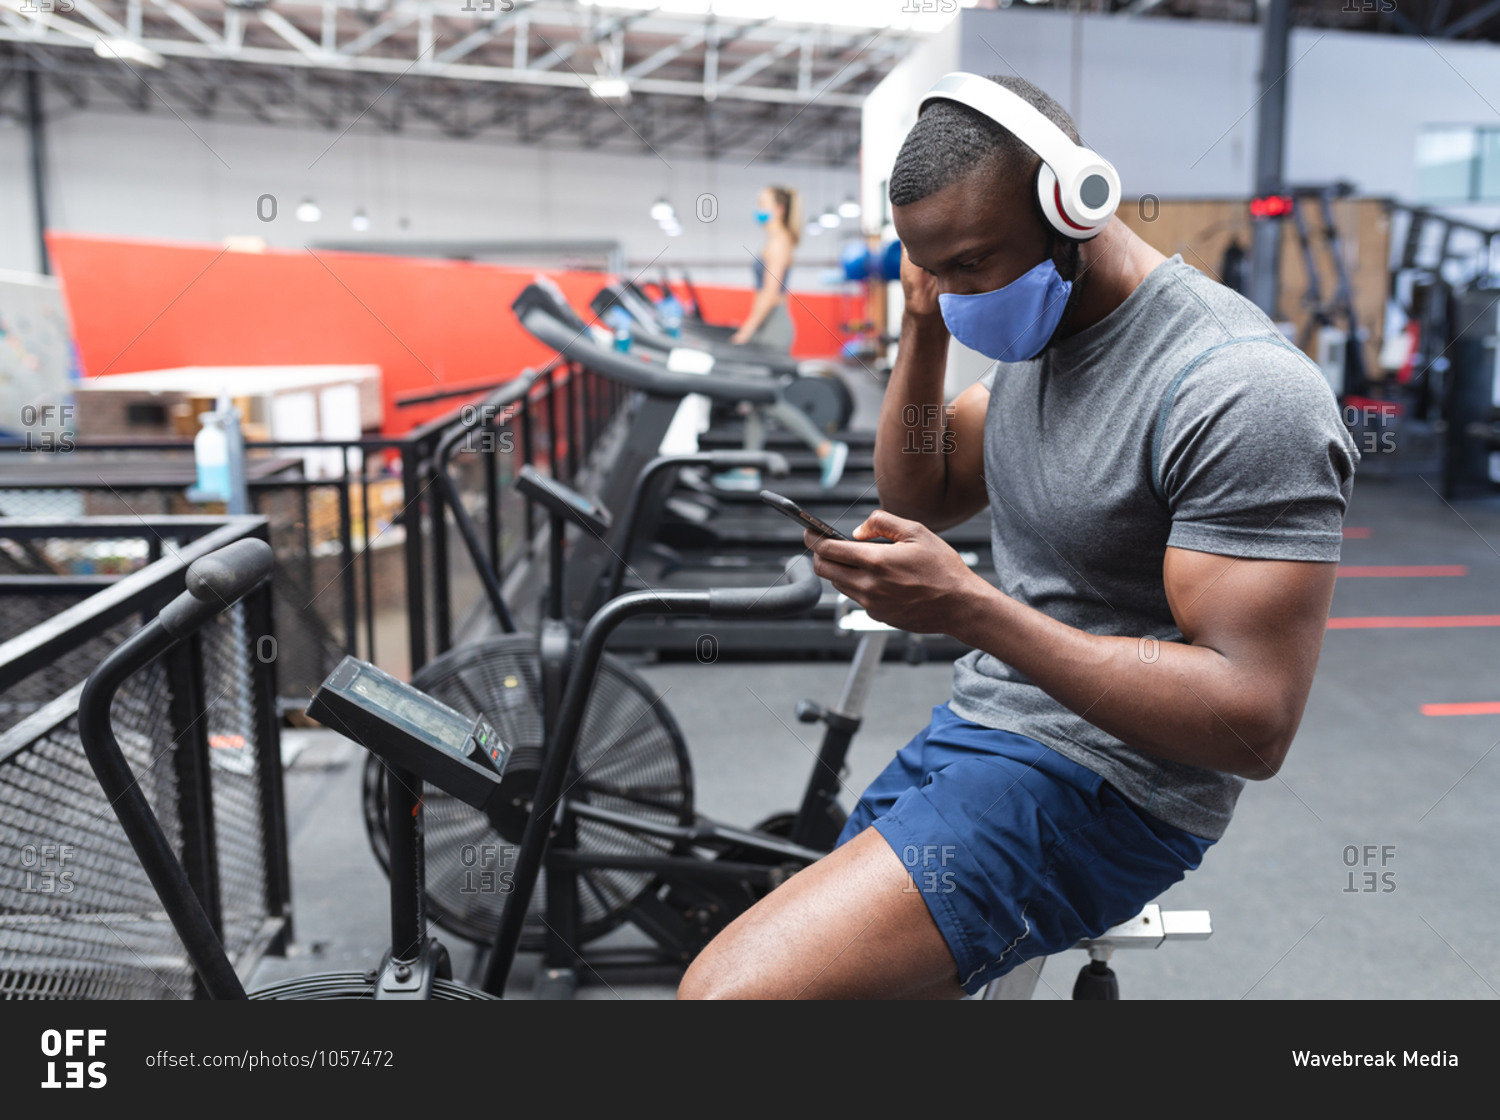 Fit African American man wearing face mask and headphones using smartphone while sitting on stationary bike in the gym.